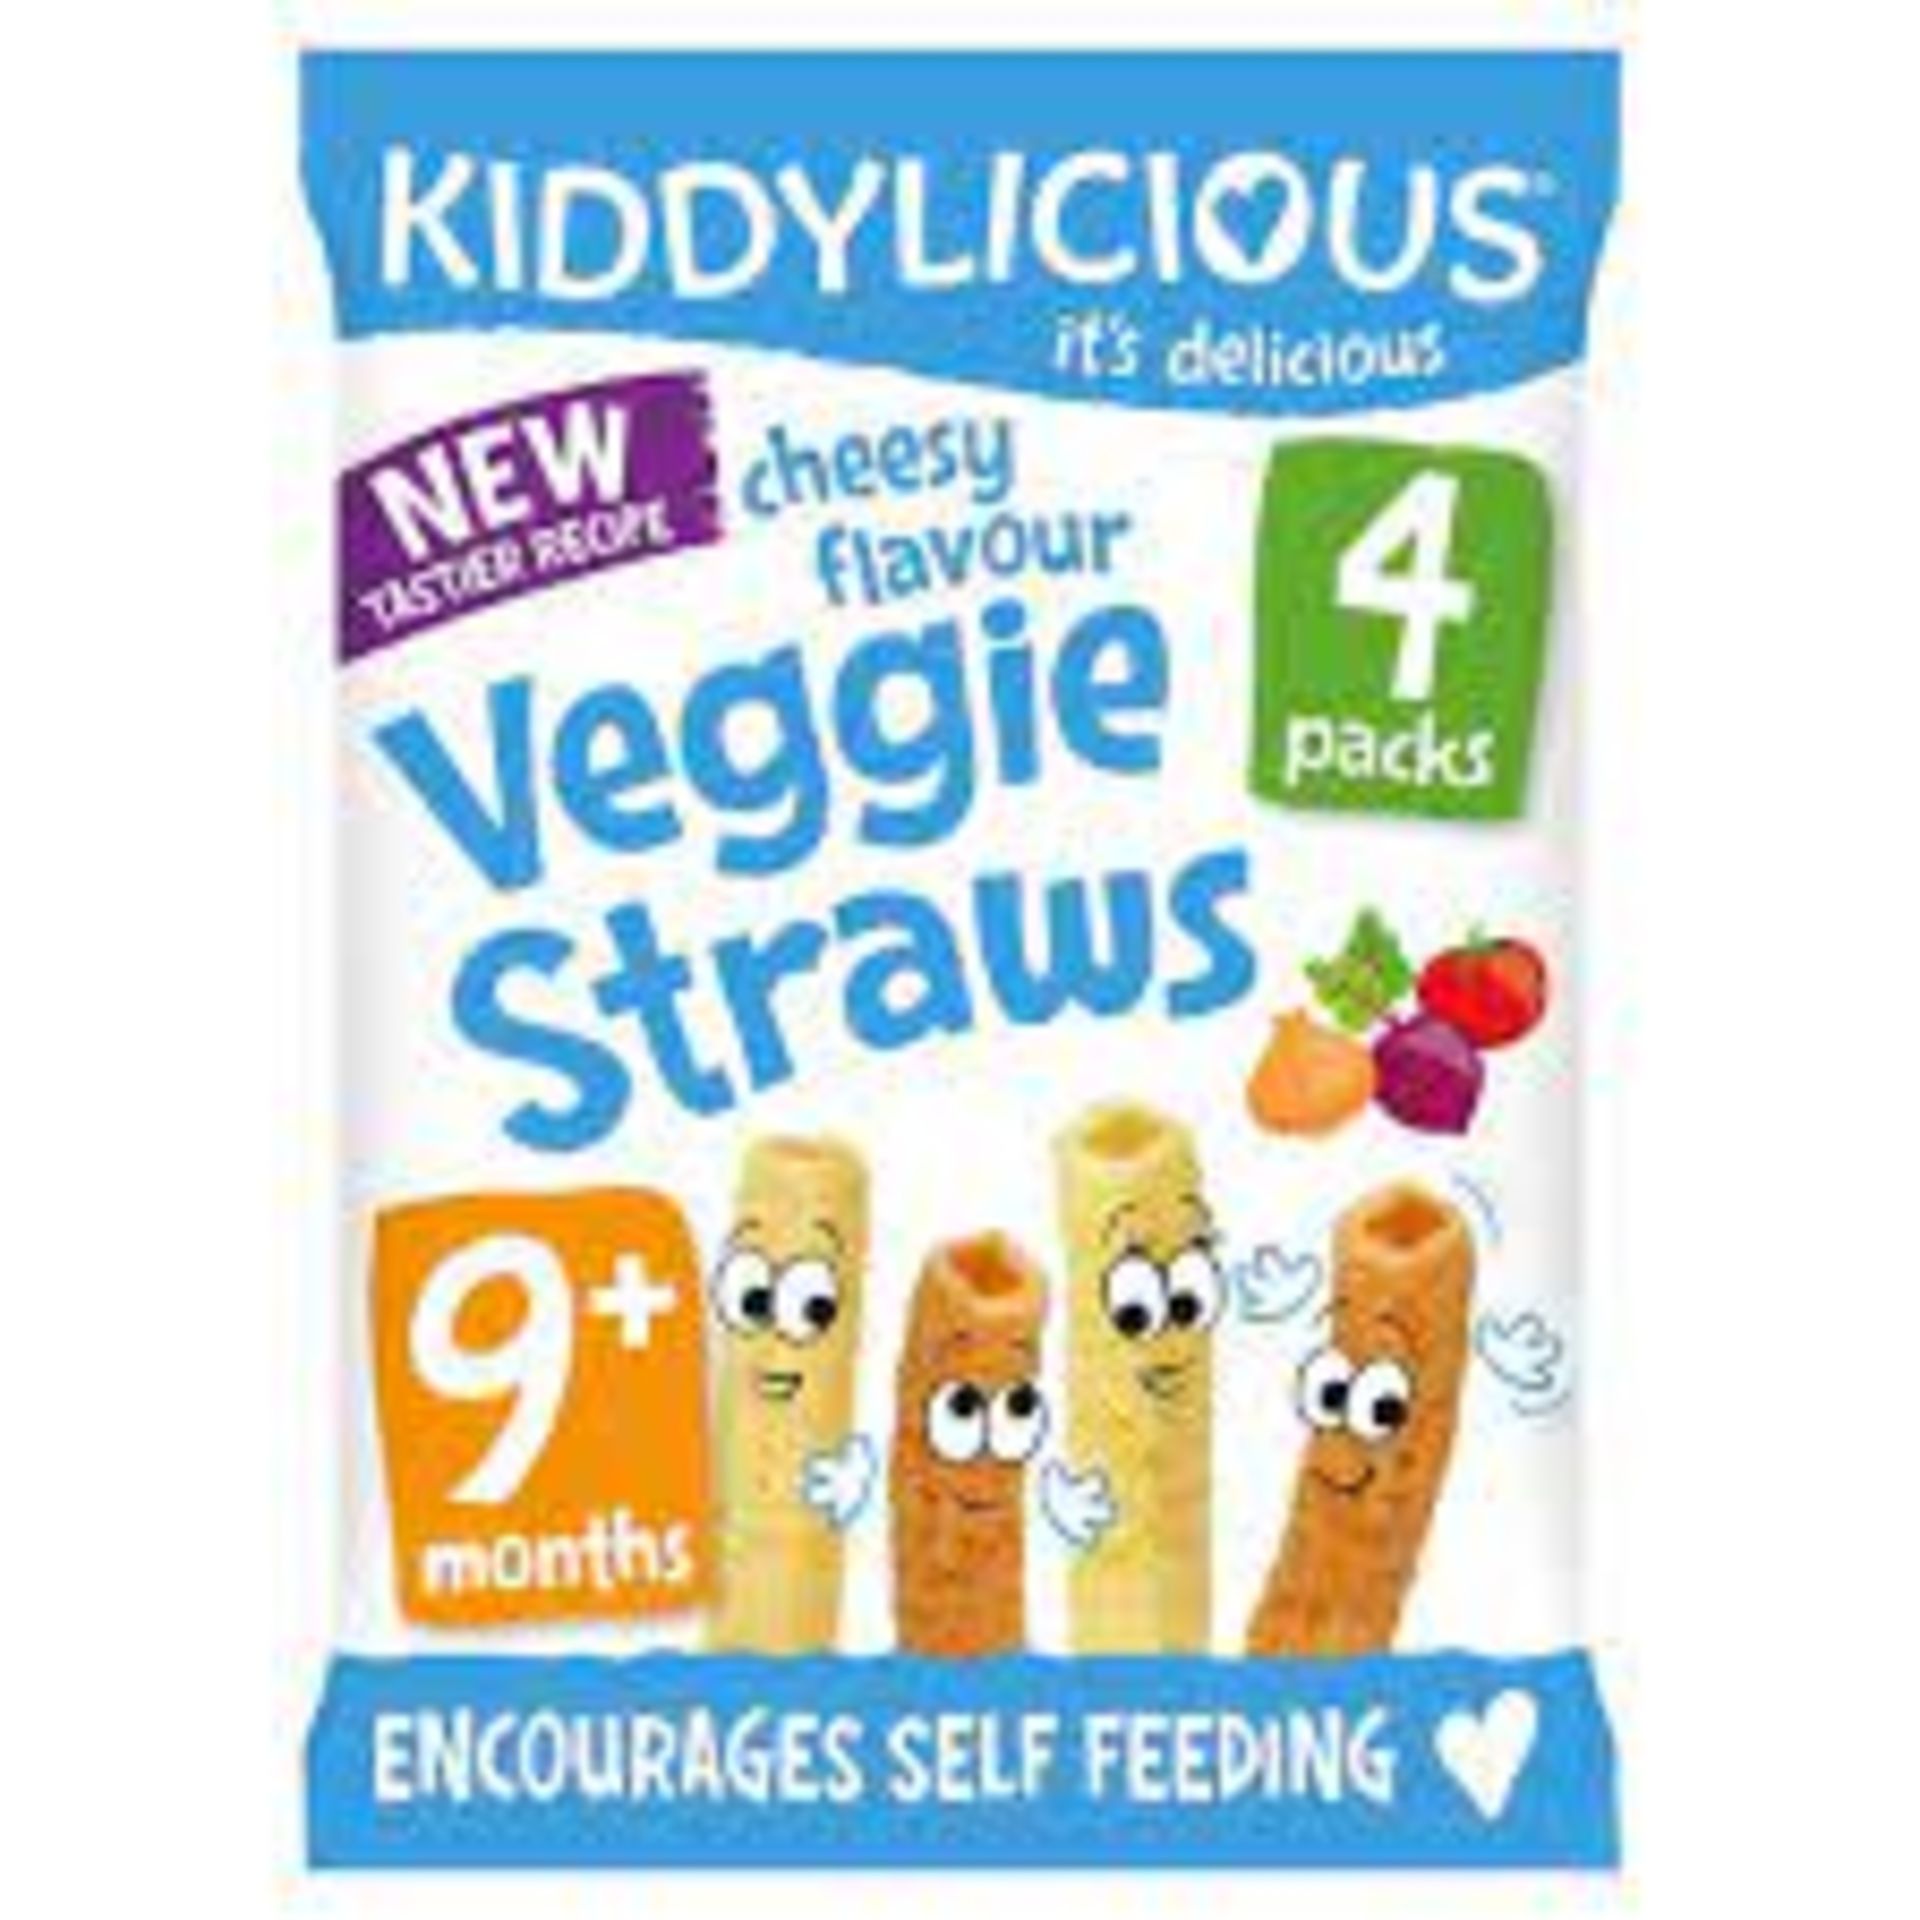 RRP £2329 (Approx. Count 137) spW37d2081Z 45 x Kiddylicious Cheesy Veggie Straws - Delicious